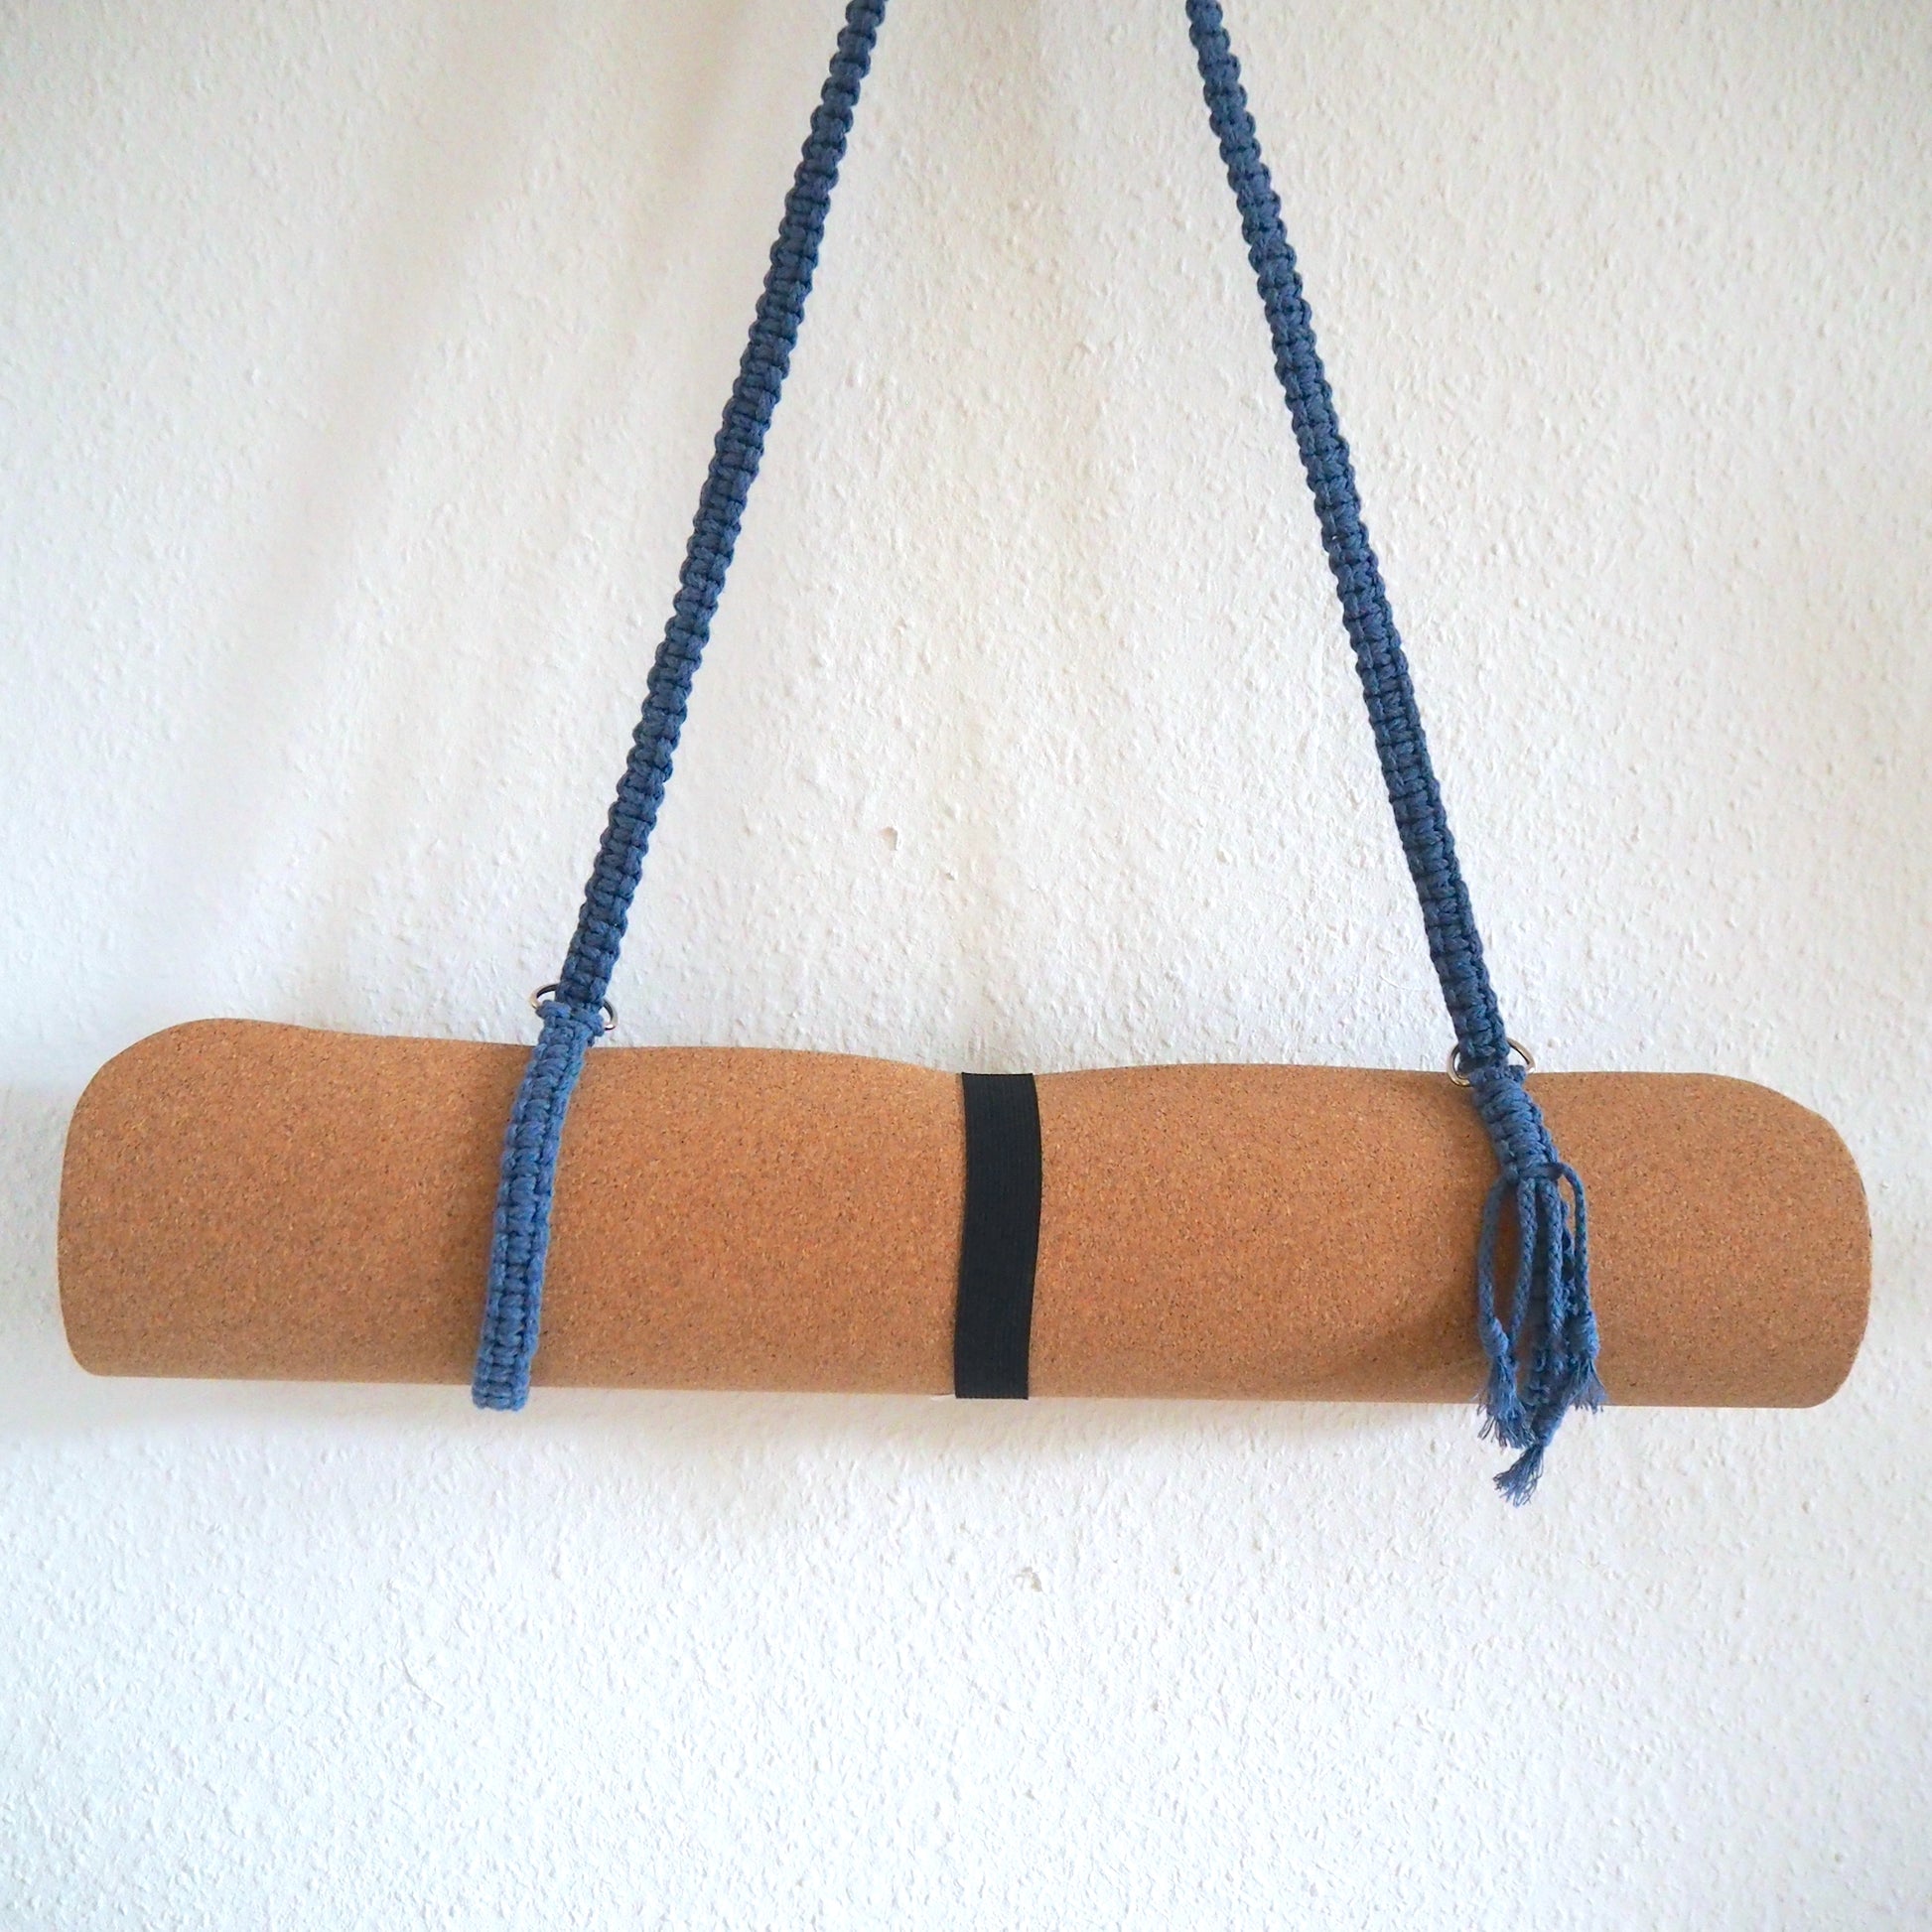 Carrying strap for yoga mat